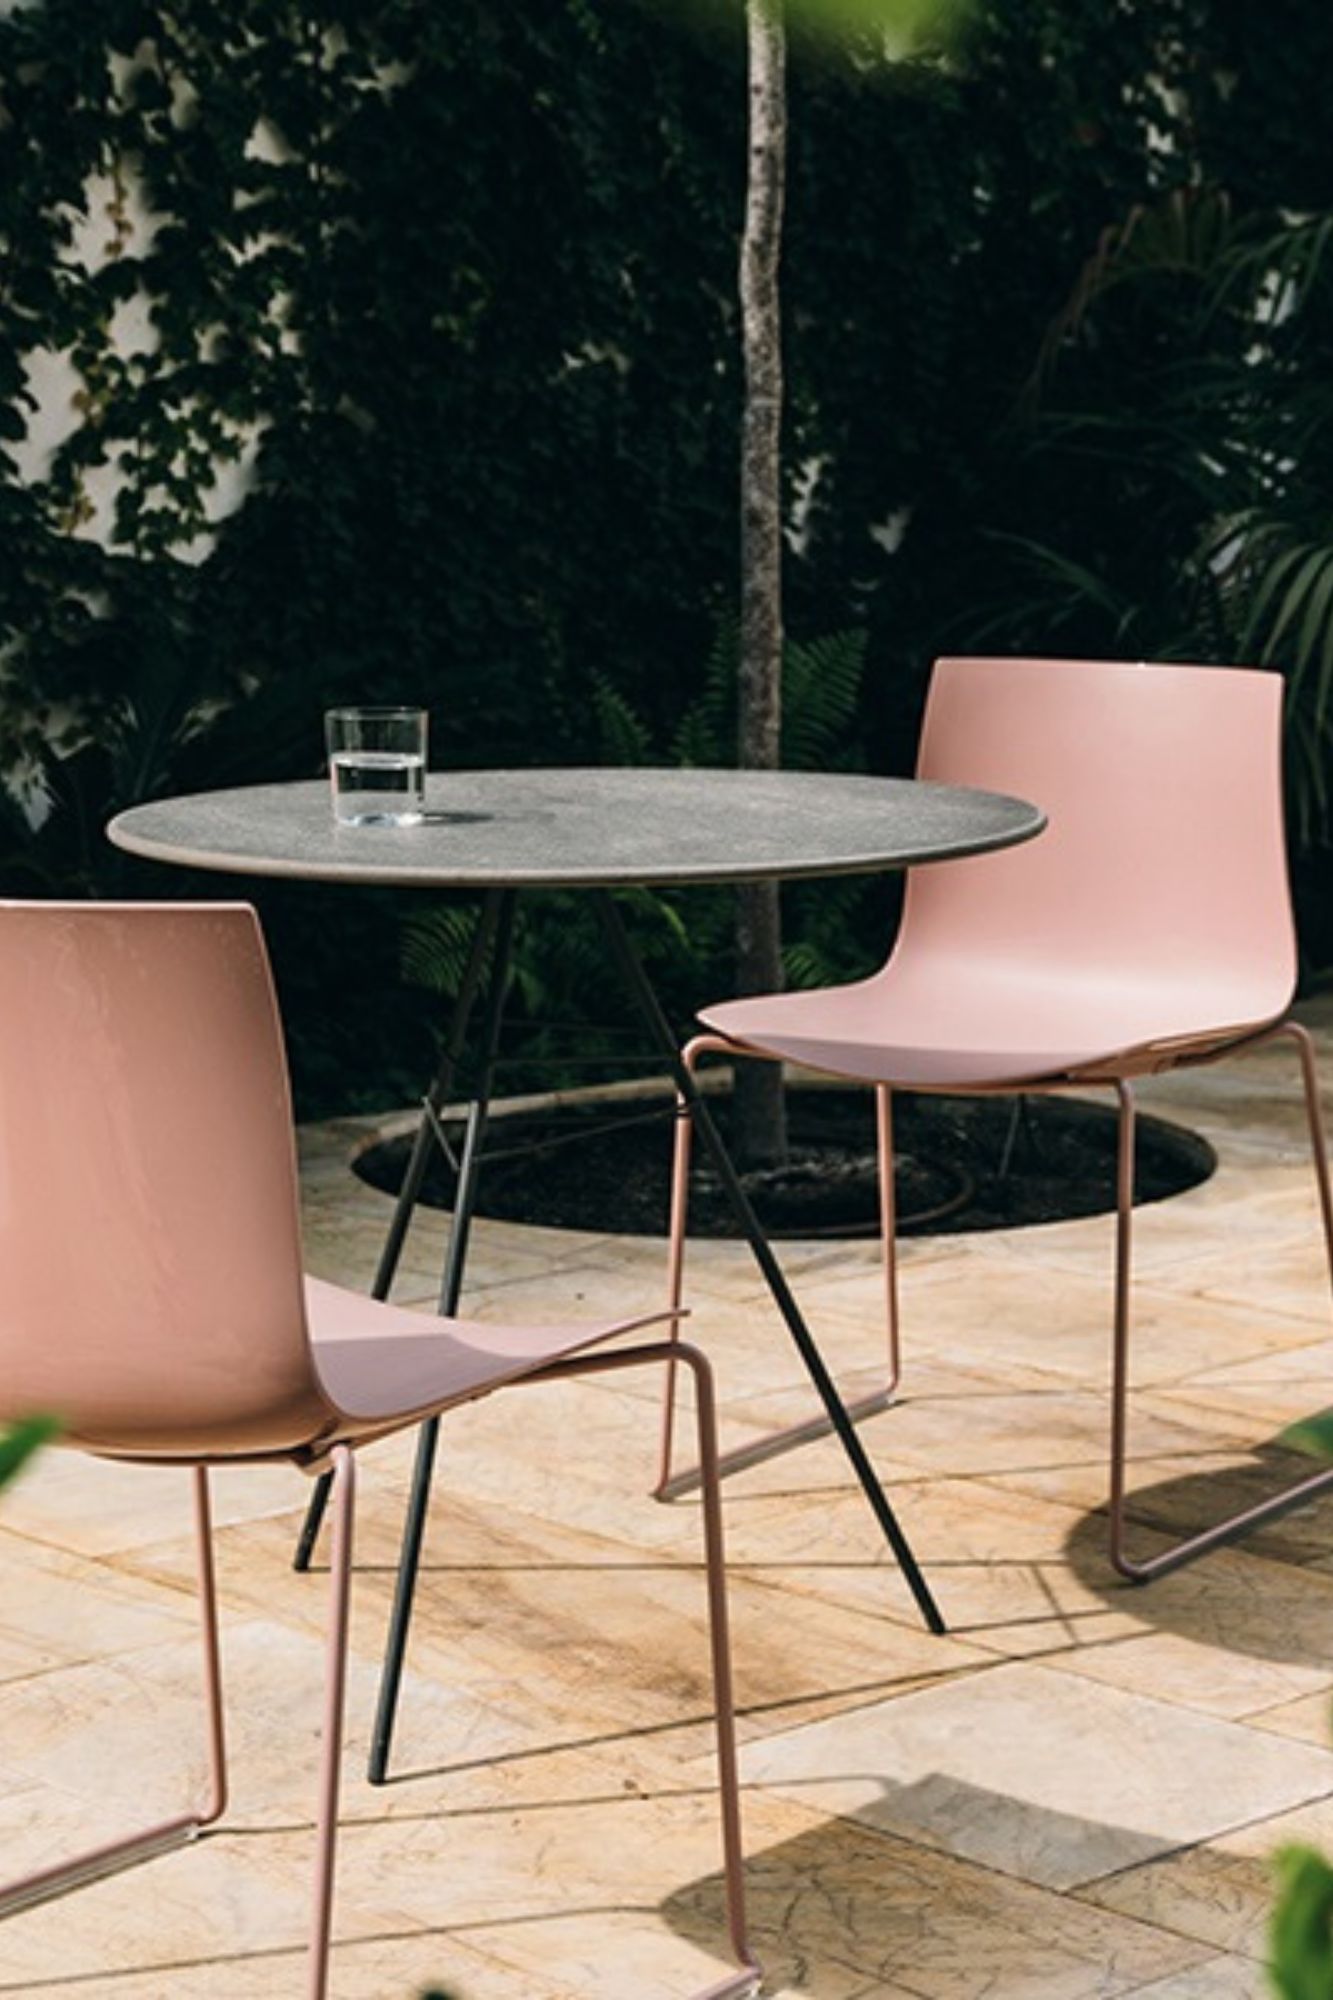 outdoor furniture, Arper for Outdoor – Furniture that Connects to the Environment